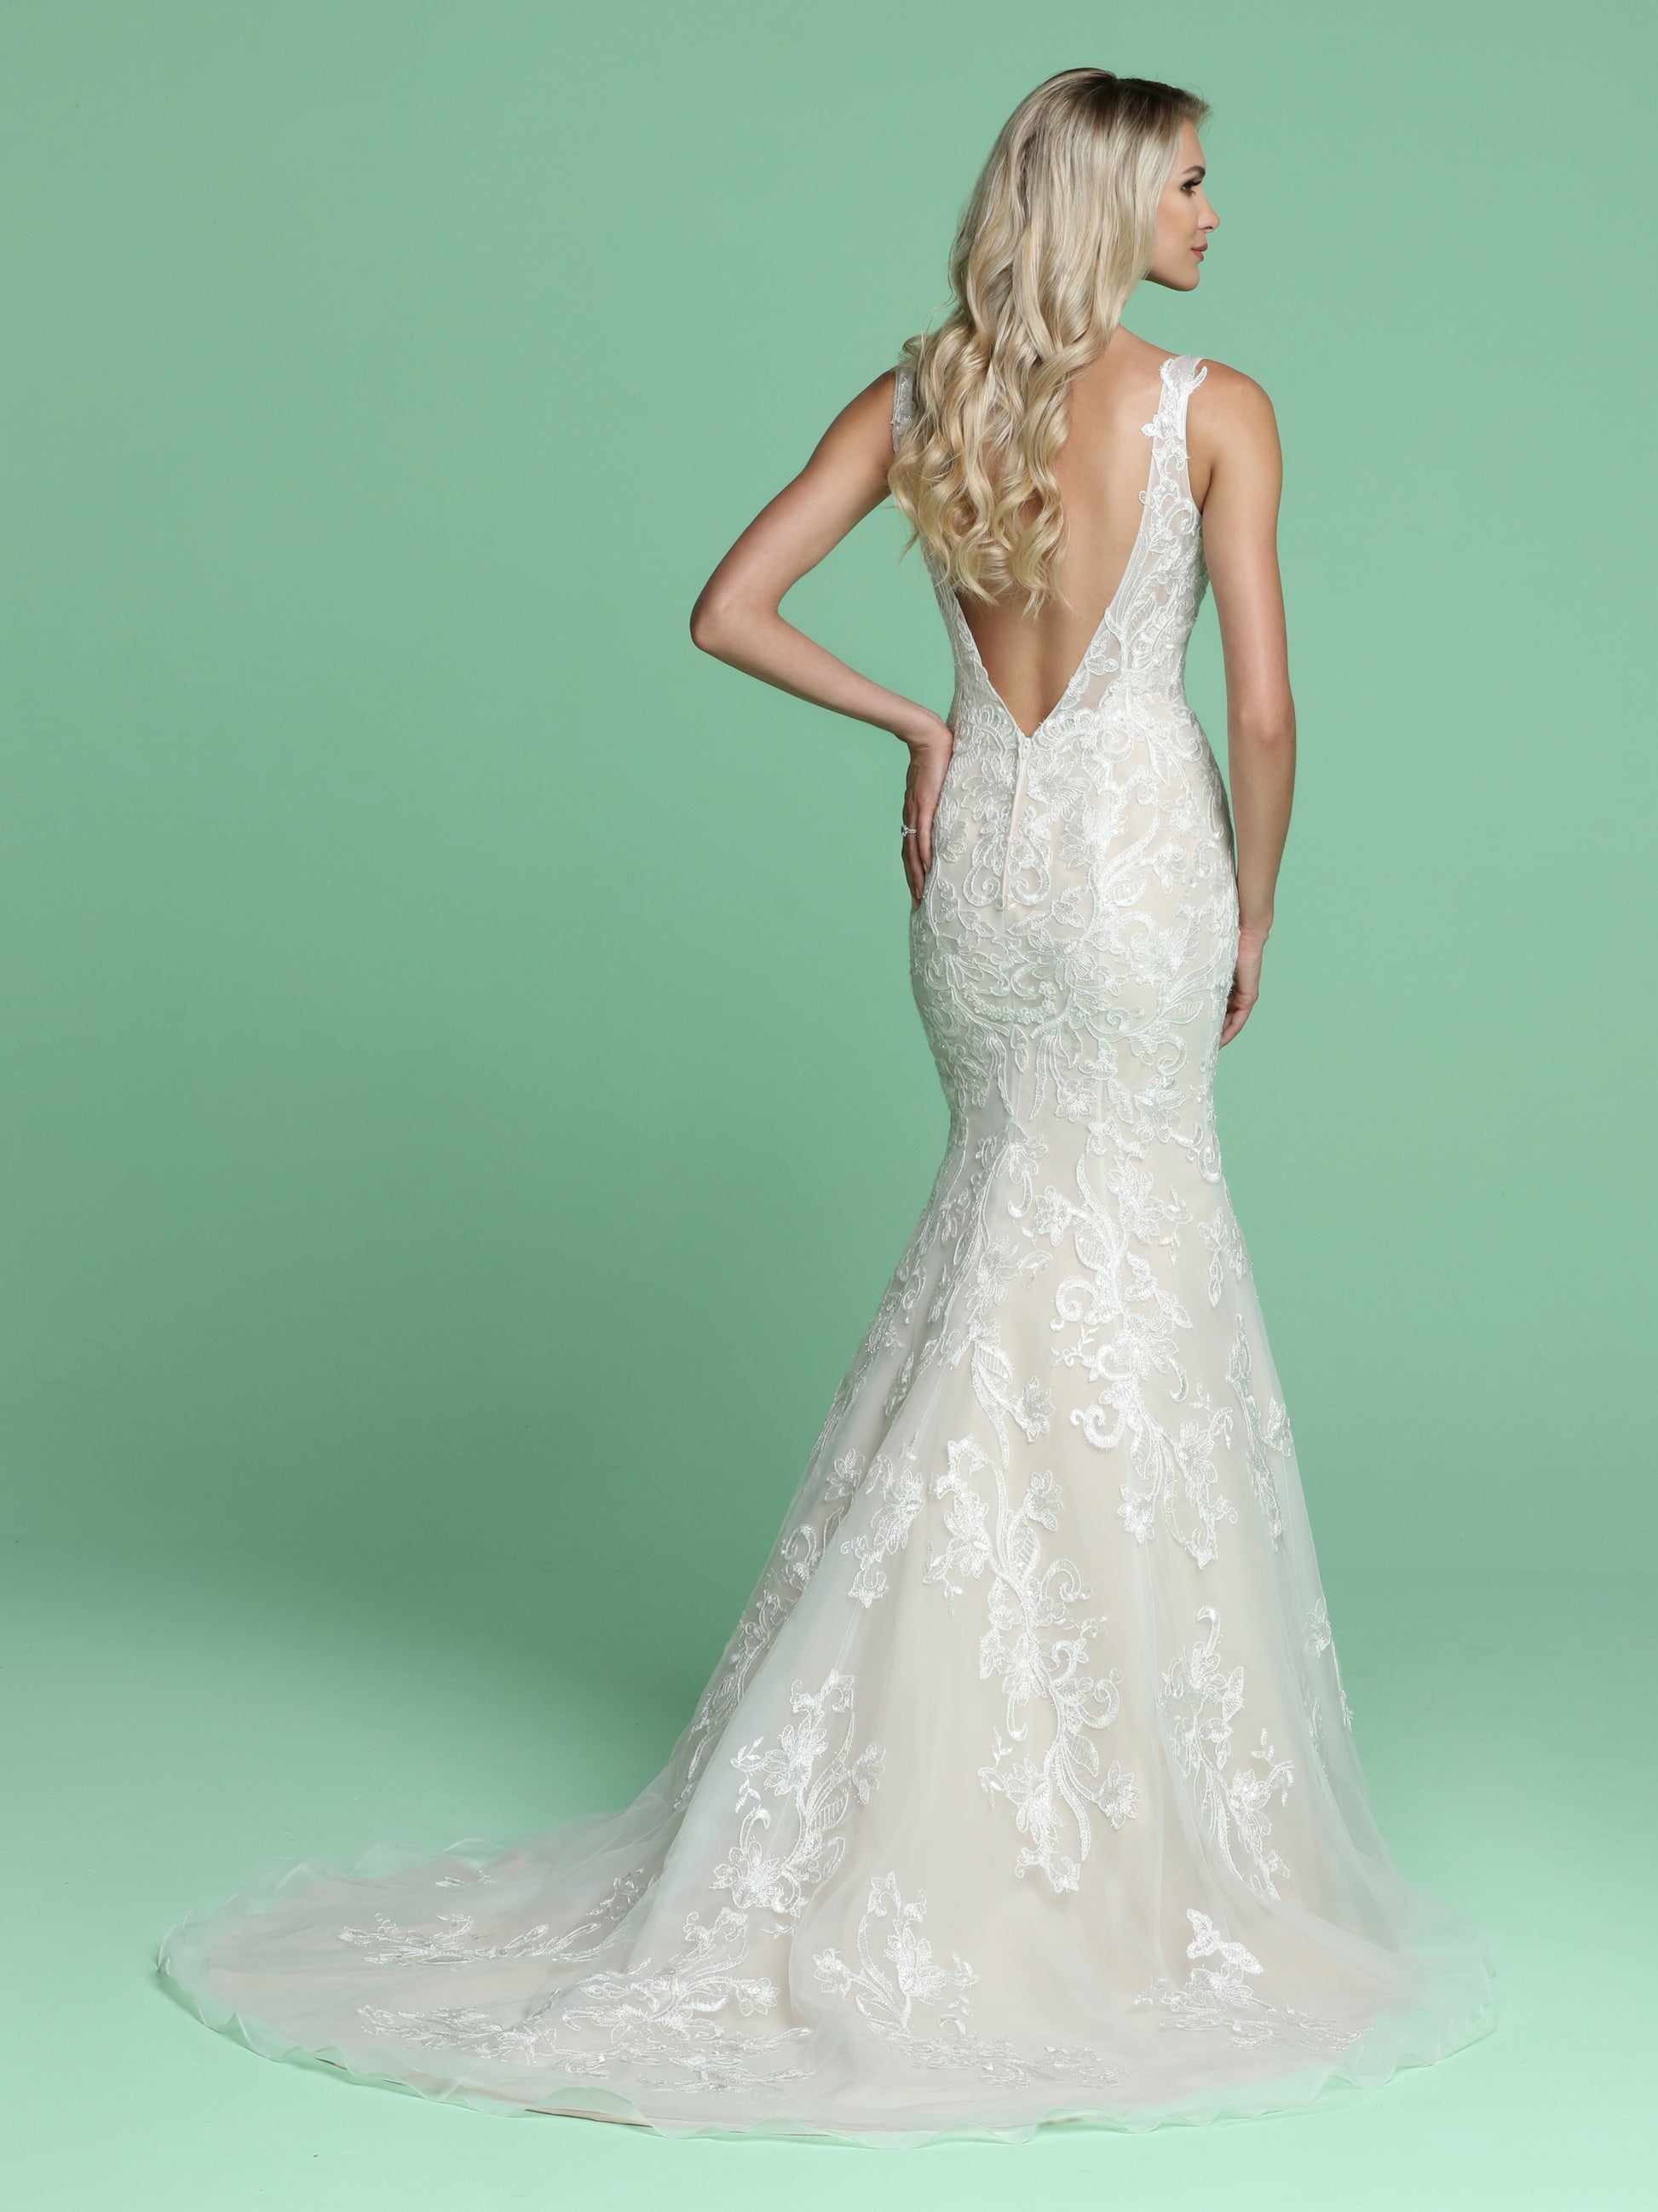 Davinci Bridal 50624 is a long Embroidered Lace Fit & Flare Mermaid Wedding Dress. Featuring an open V Back. Fitted Bodice with a trumpet skirt leading into a sweeping train,  Available for 1-2 Week Delivery!!!  Available Sizes: 2,4,6,8,10,12,14,16,18,20  Available Colors: Ivory/Ivory, Ivory/Nude